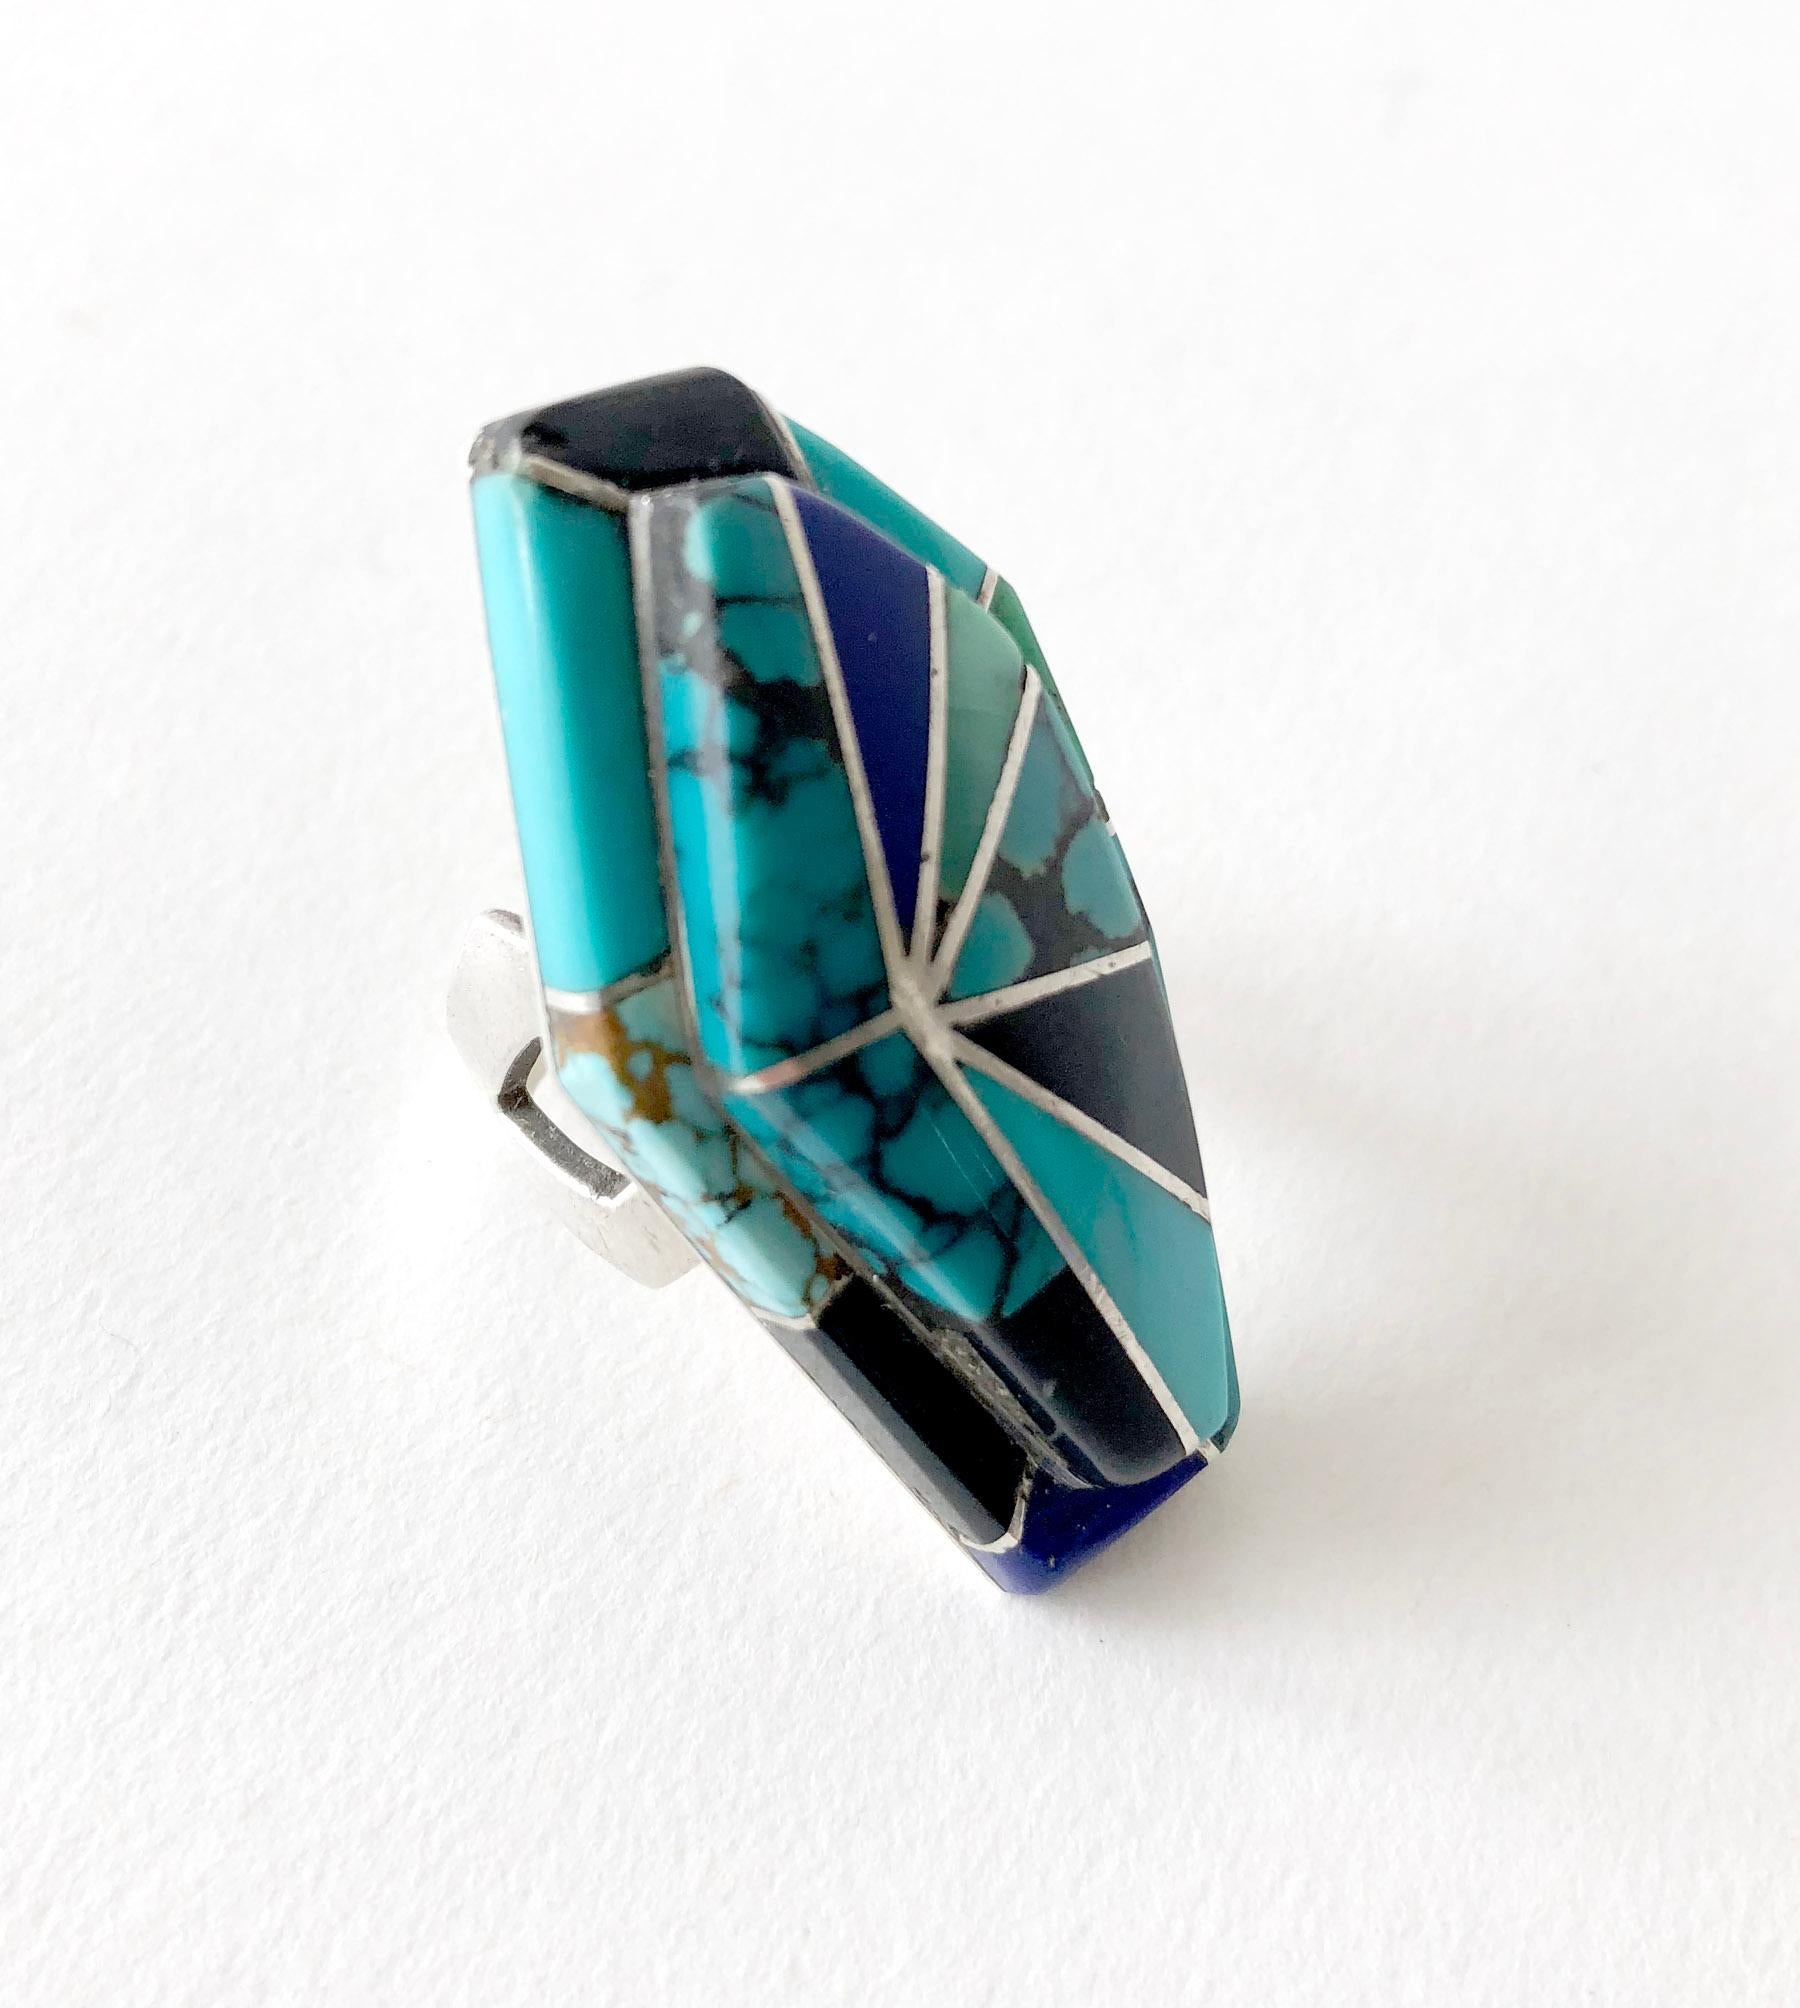 Custom made ring of turquoise, onyx and lapis lazuli inlaid in sterling silver and created by Richard Begay of Navajoland, Arizona.  Face of the ring measures 1.75